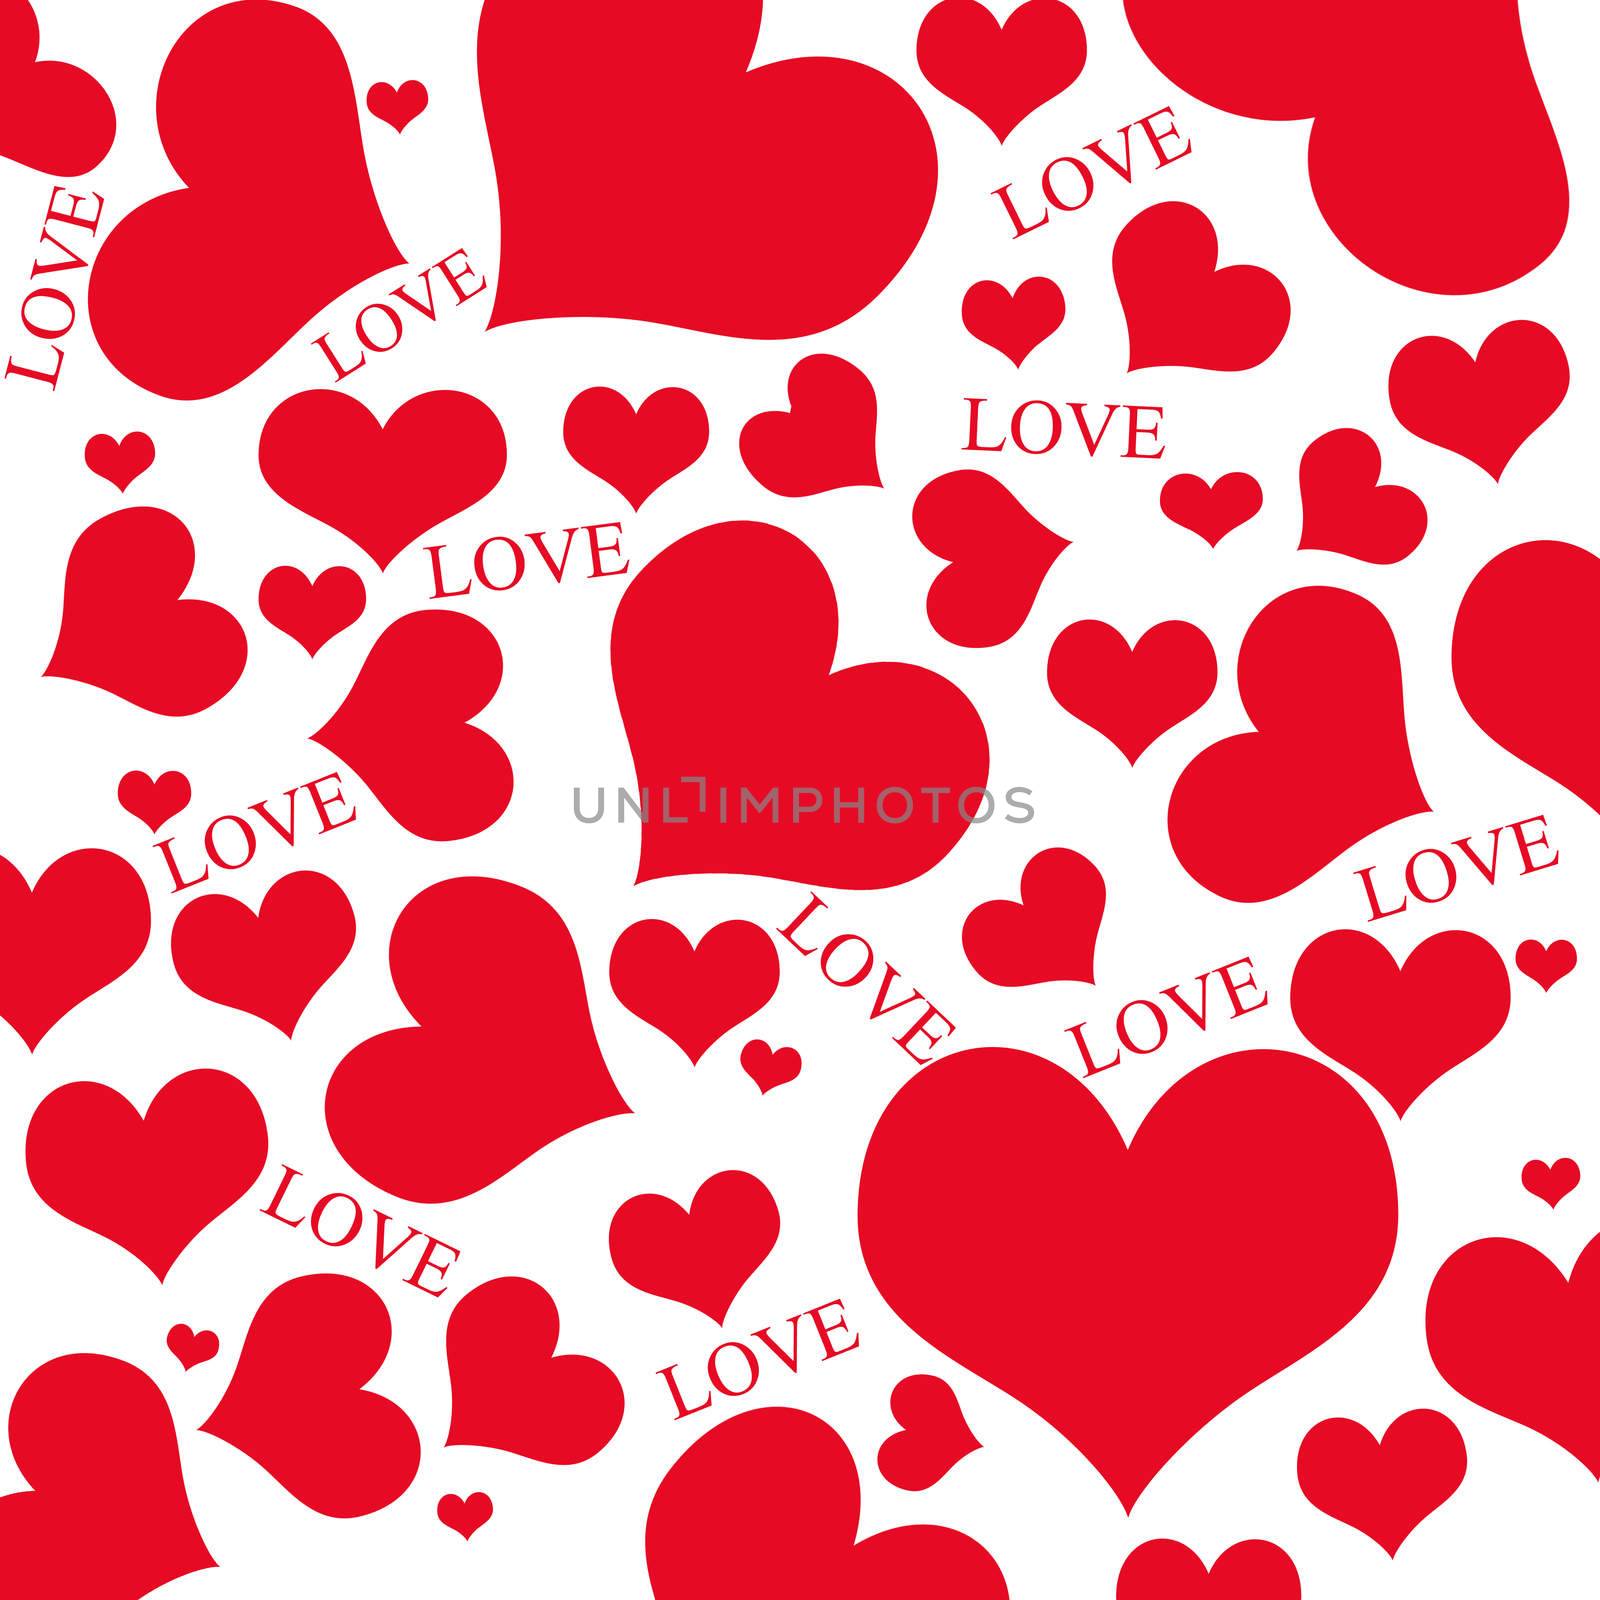 Red hearts and LOVE wording by Gamjai